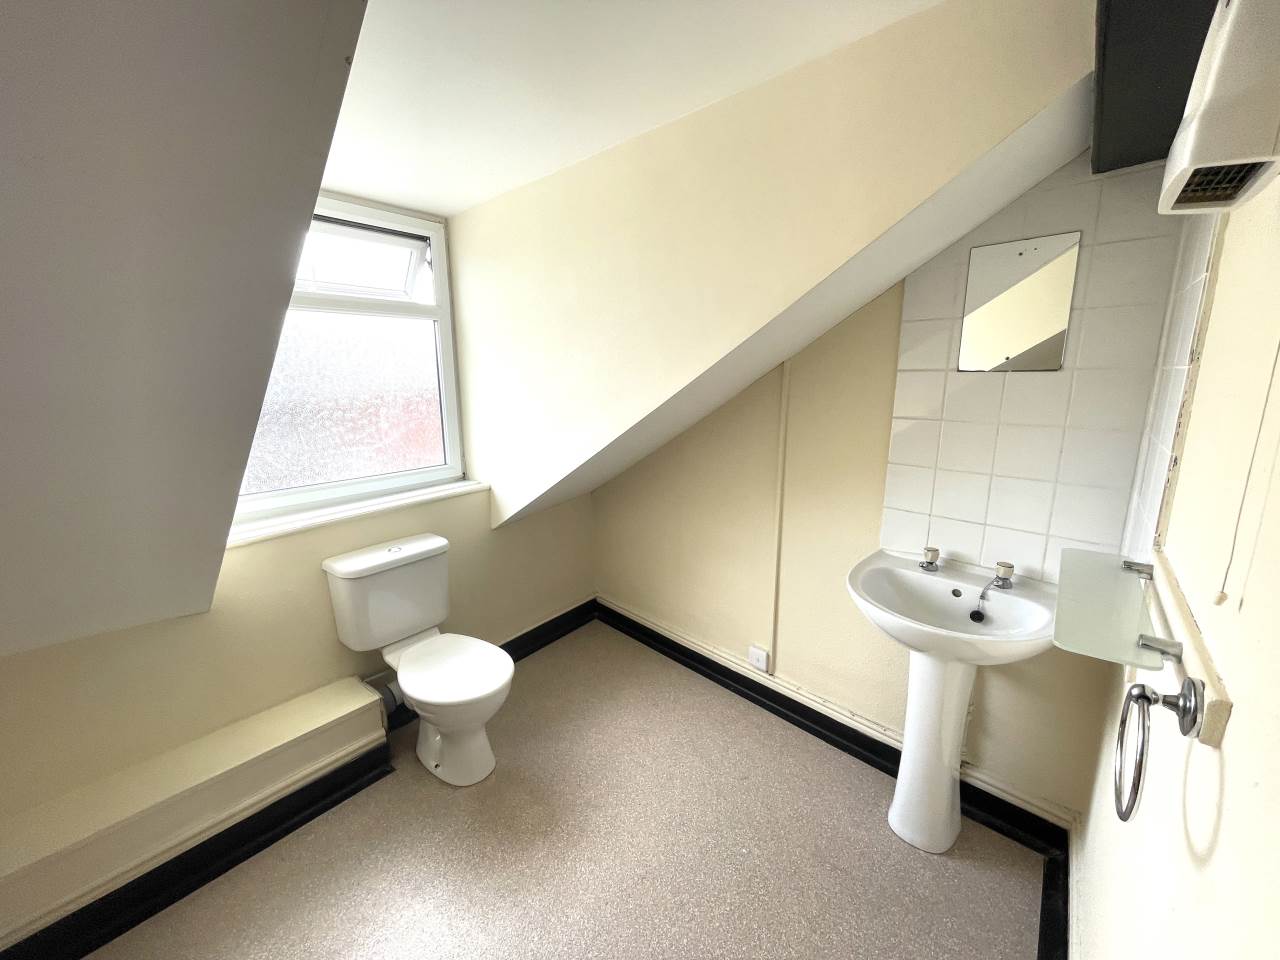 1 bed house / flat share to rent in Portland Street, Aberystwyth  - Property Image 4